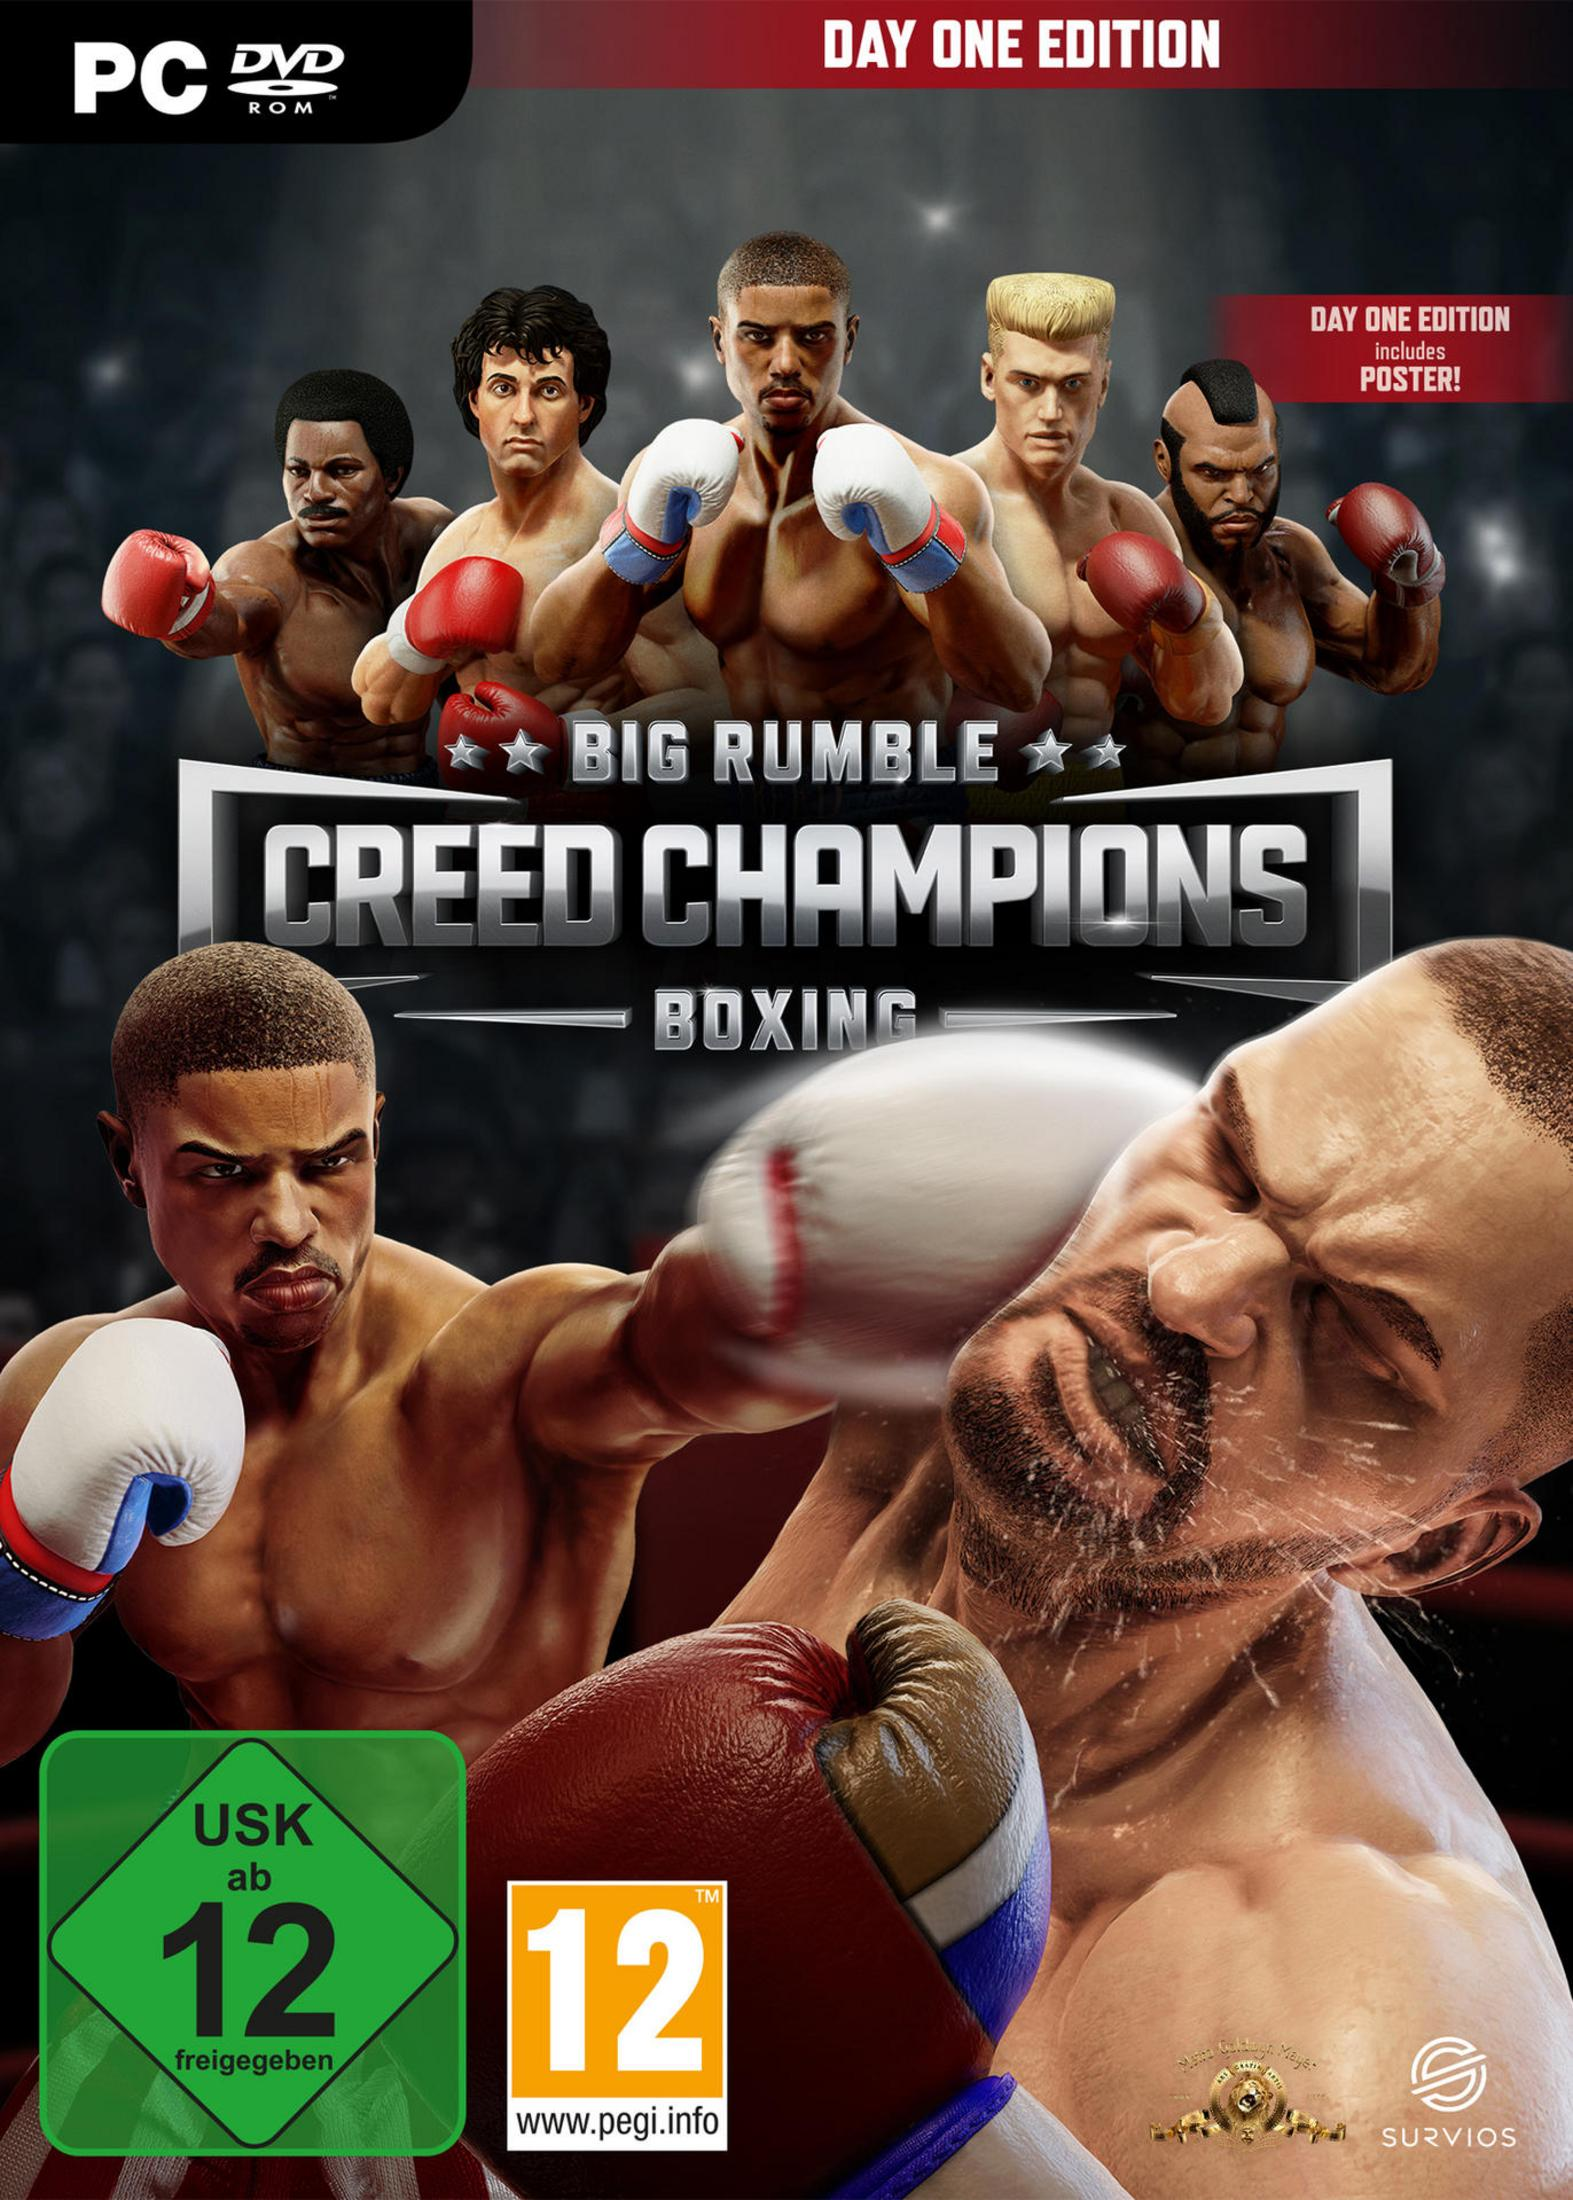 ED. RUMBLE - CHAMPIONSDAY [PC] BOXING-CREED ONE BIG